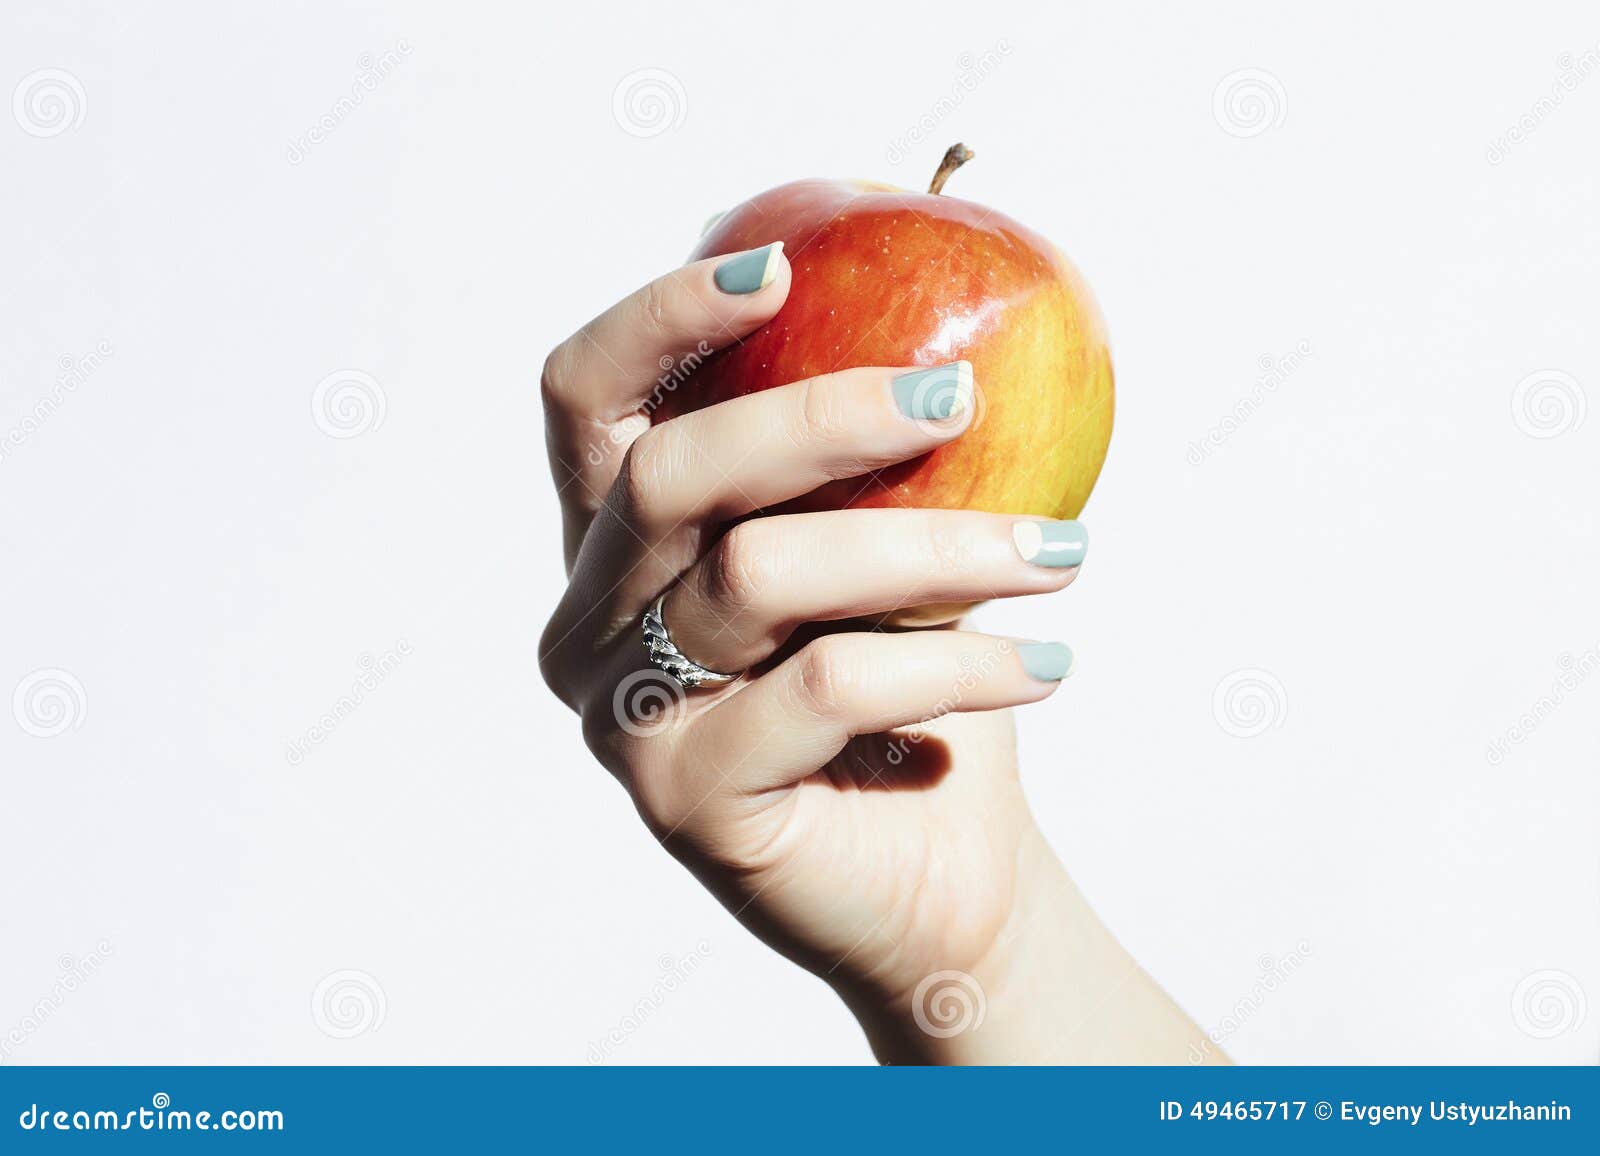 red apple in hand with manicure.female hands.beauty salon woman shellac polish